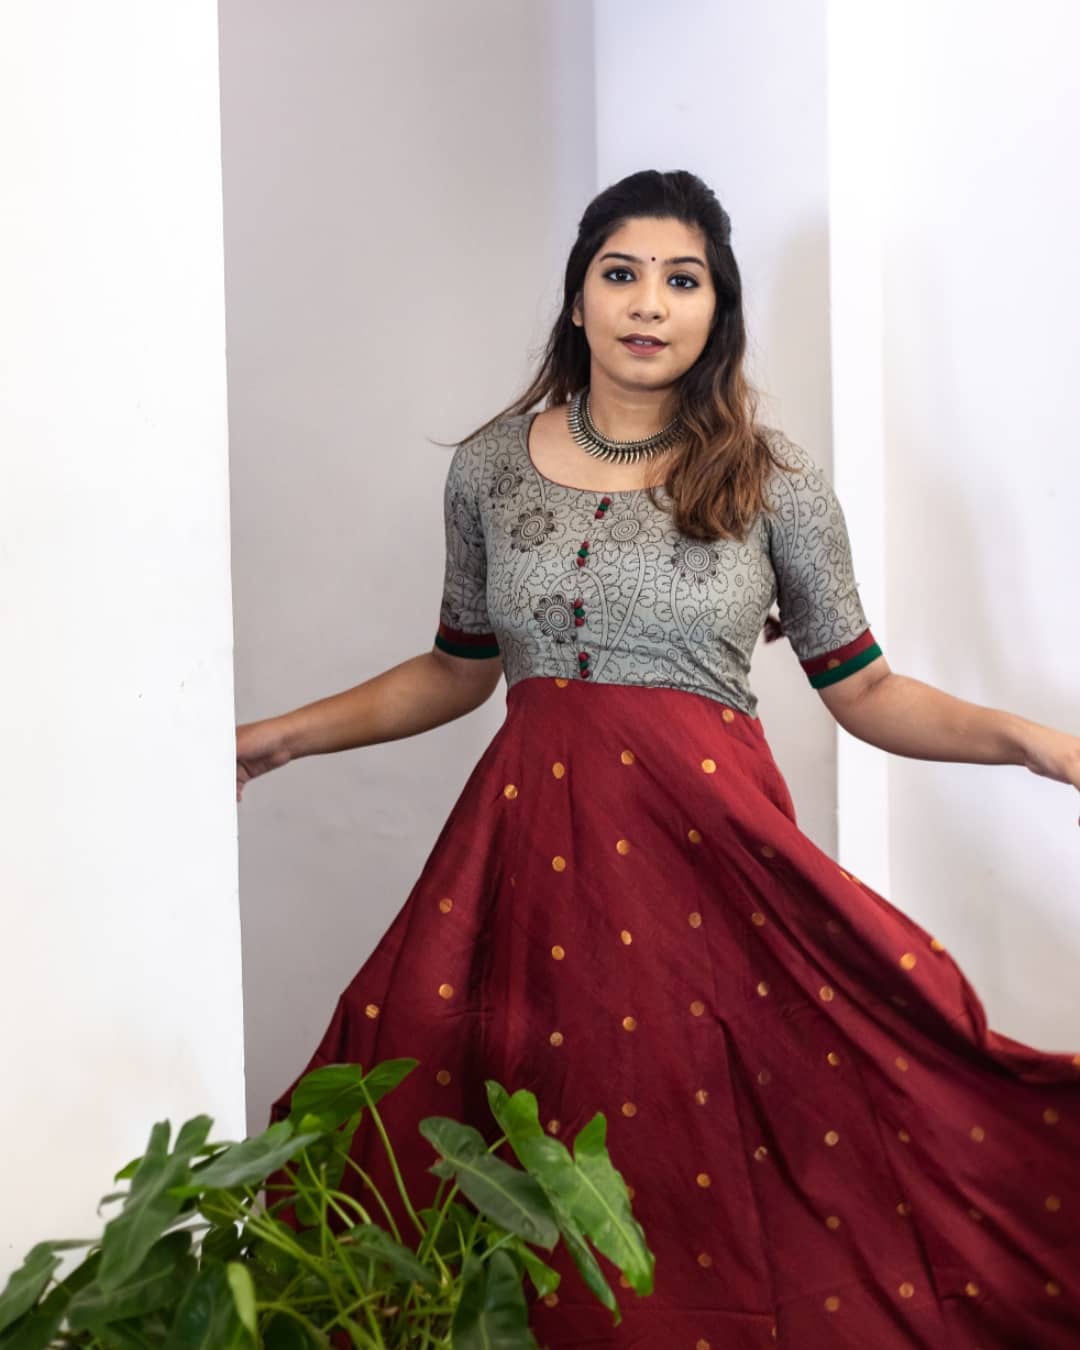 Find The Latest South Indian Long Dresses Here • Keep Me Stylish